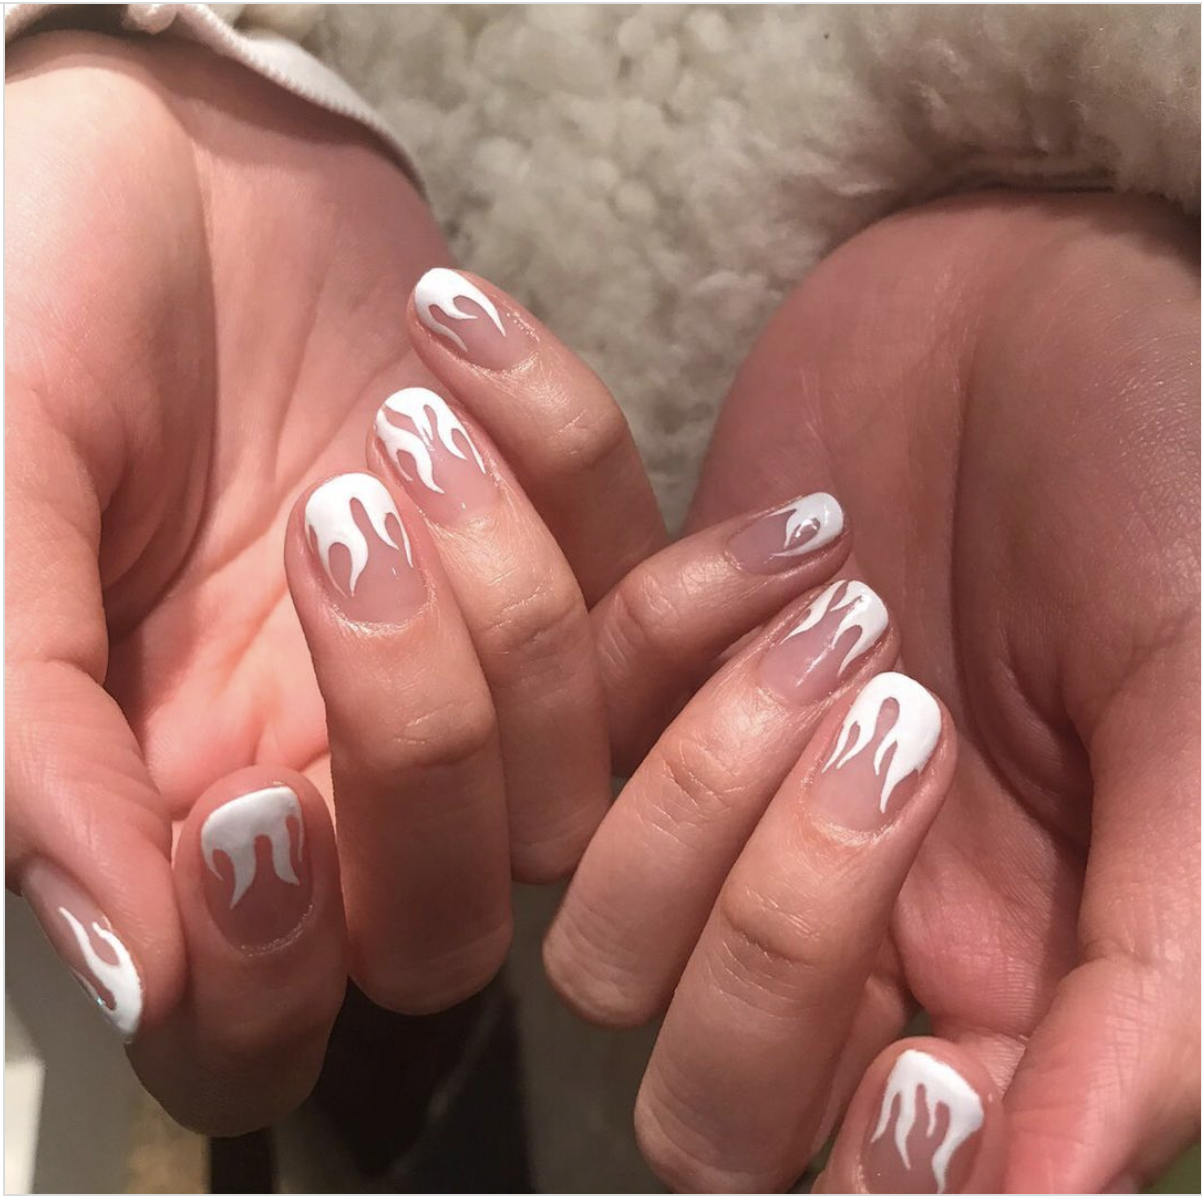 City Nails - Milky white | Acrylic by Ryan | Facebook